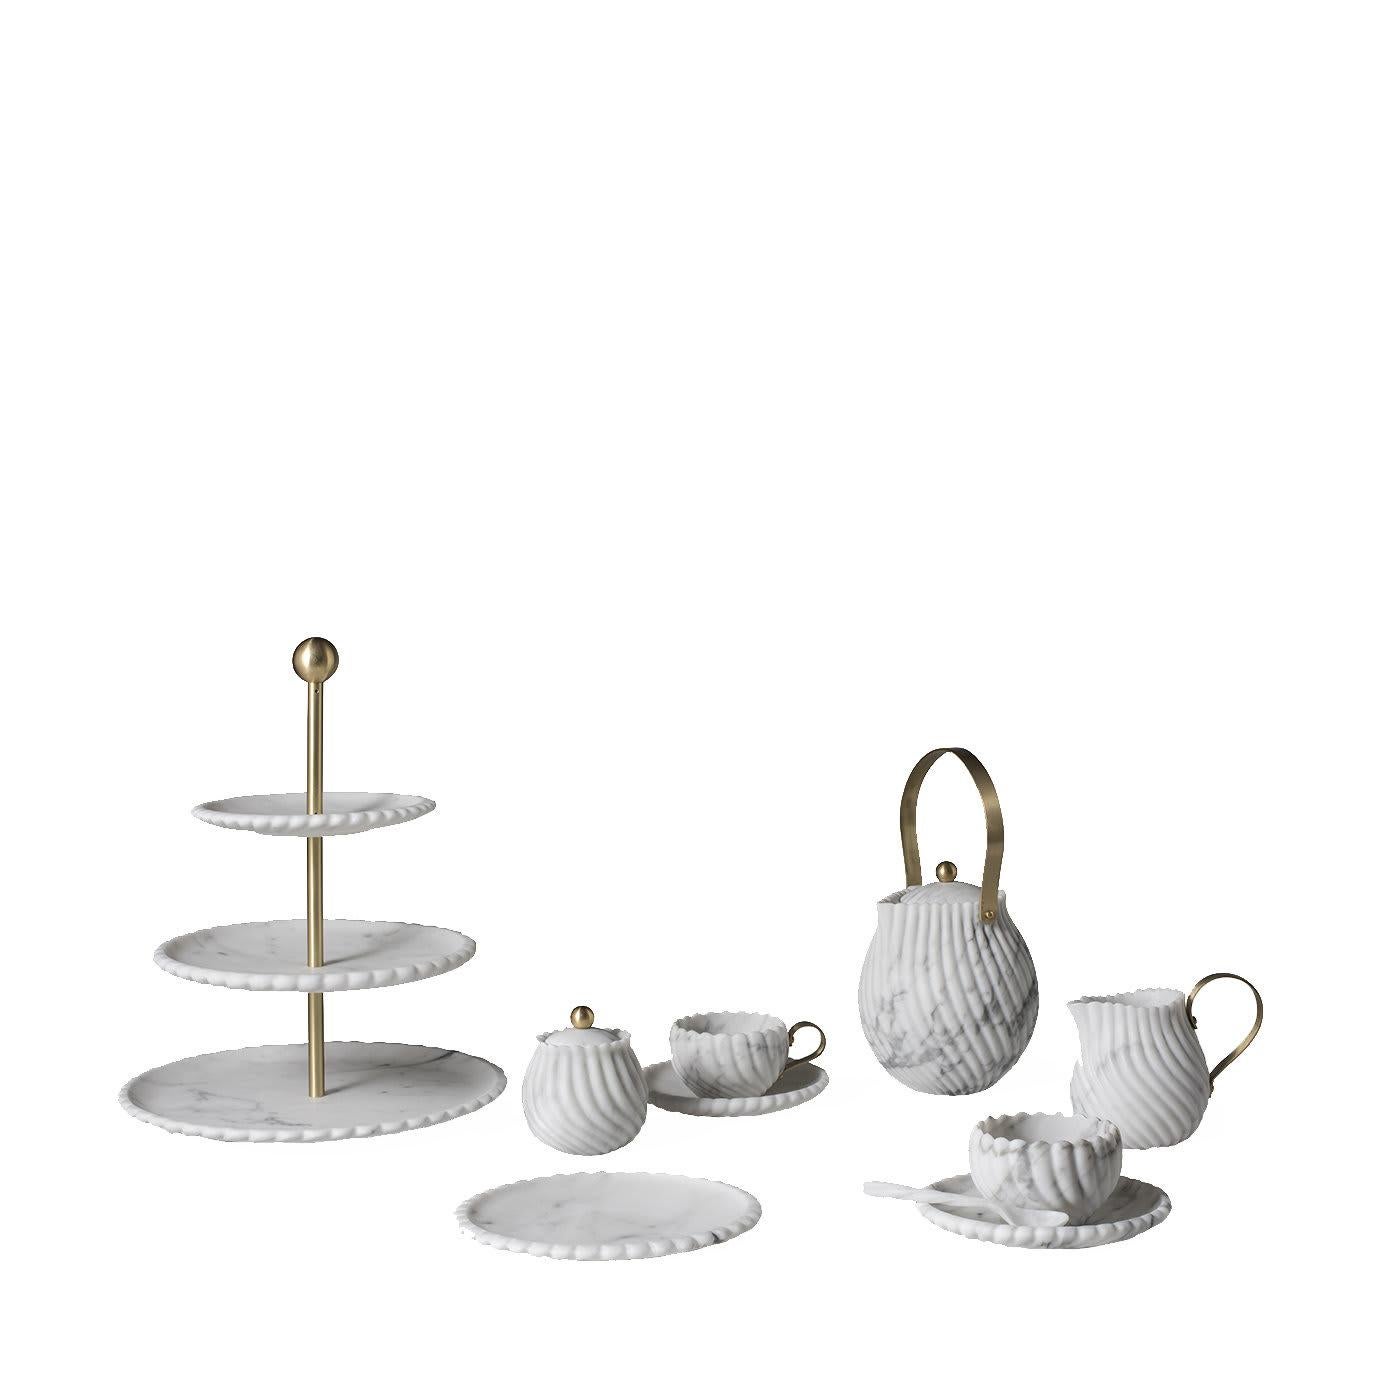 Part of the Victoria collection that celebrates the ritual of enjoying tea in the afternoon, this piece reinterprets the iconic teapot luxuriously and sumptuously, crafting a handmade marble piece that will make a sophisticated statement on any